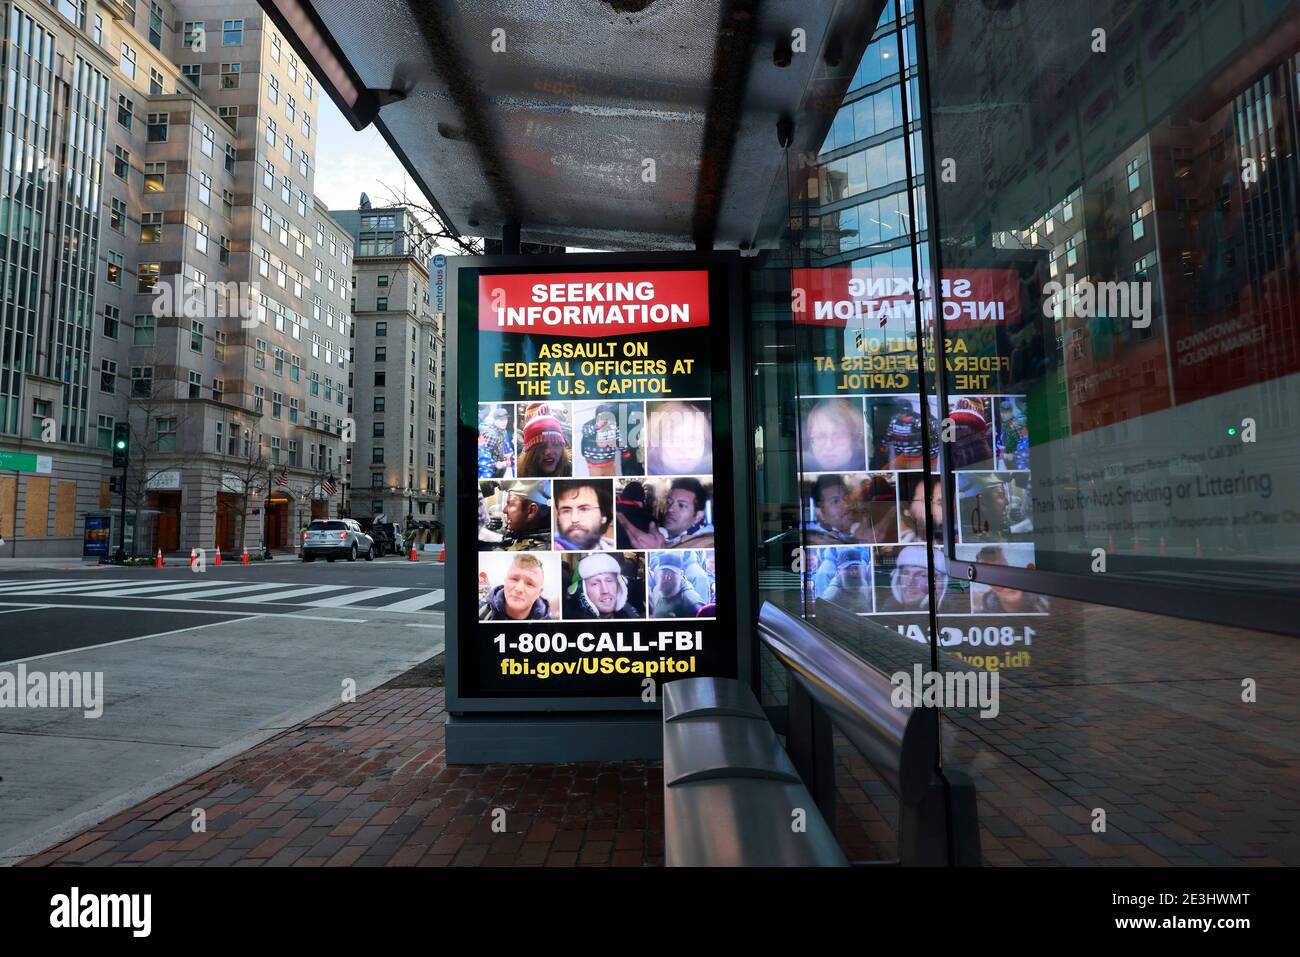 01182021- Washington, District of Columbia, USA: An electronic advertisement not far from the White House snows the faces of suspects who assaulted federal officers at the Capitol Building during the January 6, 2021 storming. The FBI is asking anybody with information about the whereabouts of the suspects to make contact with law enforcement. Stock Photo